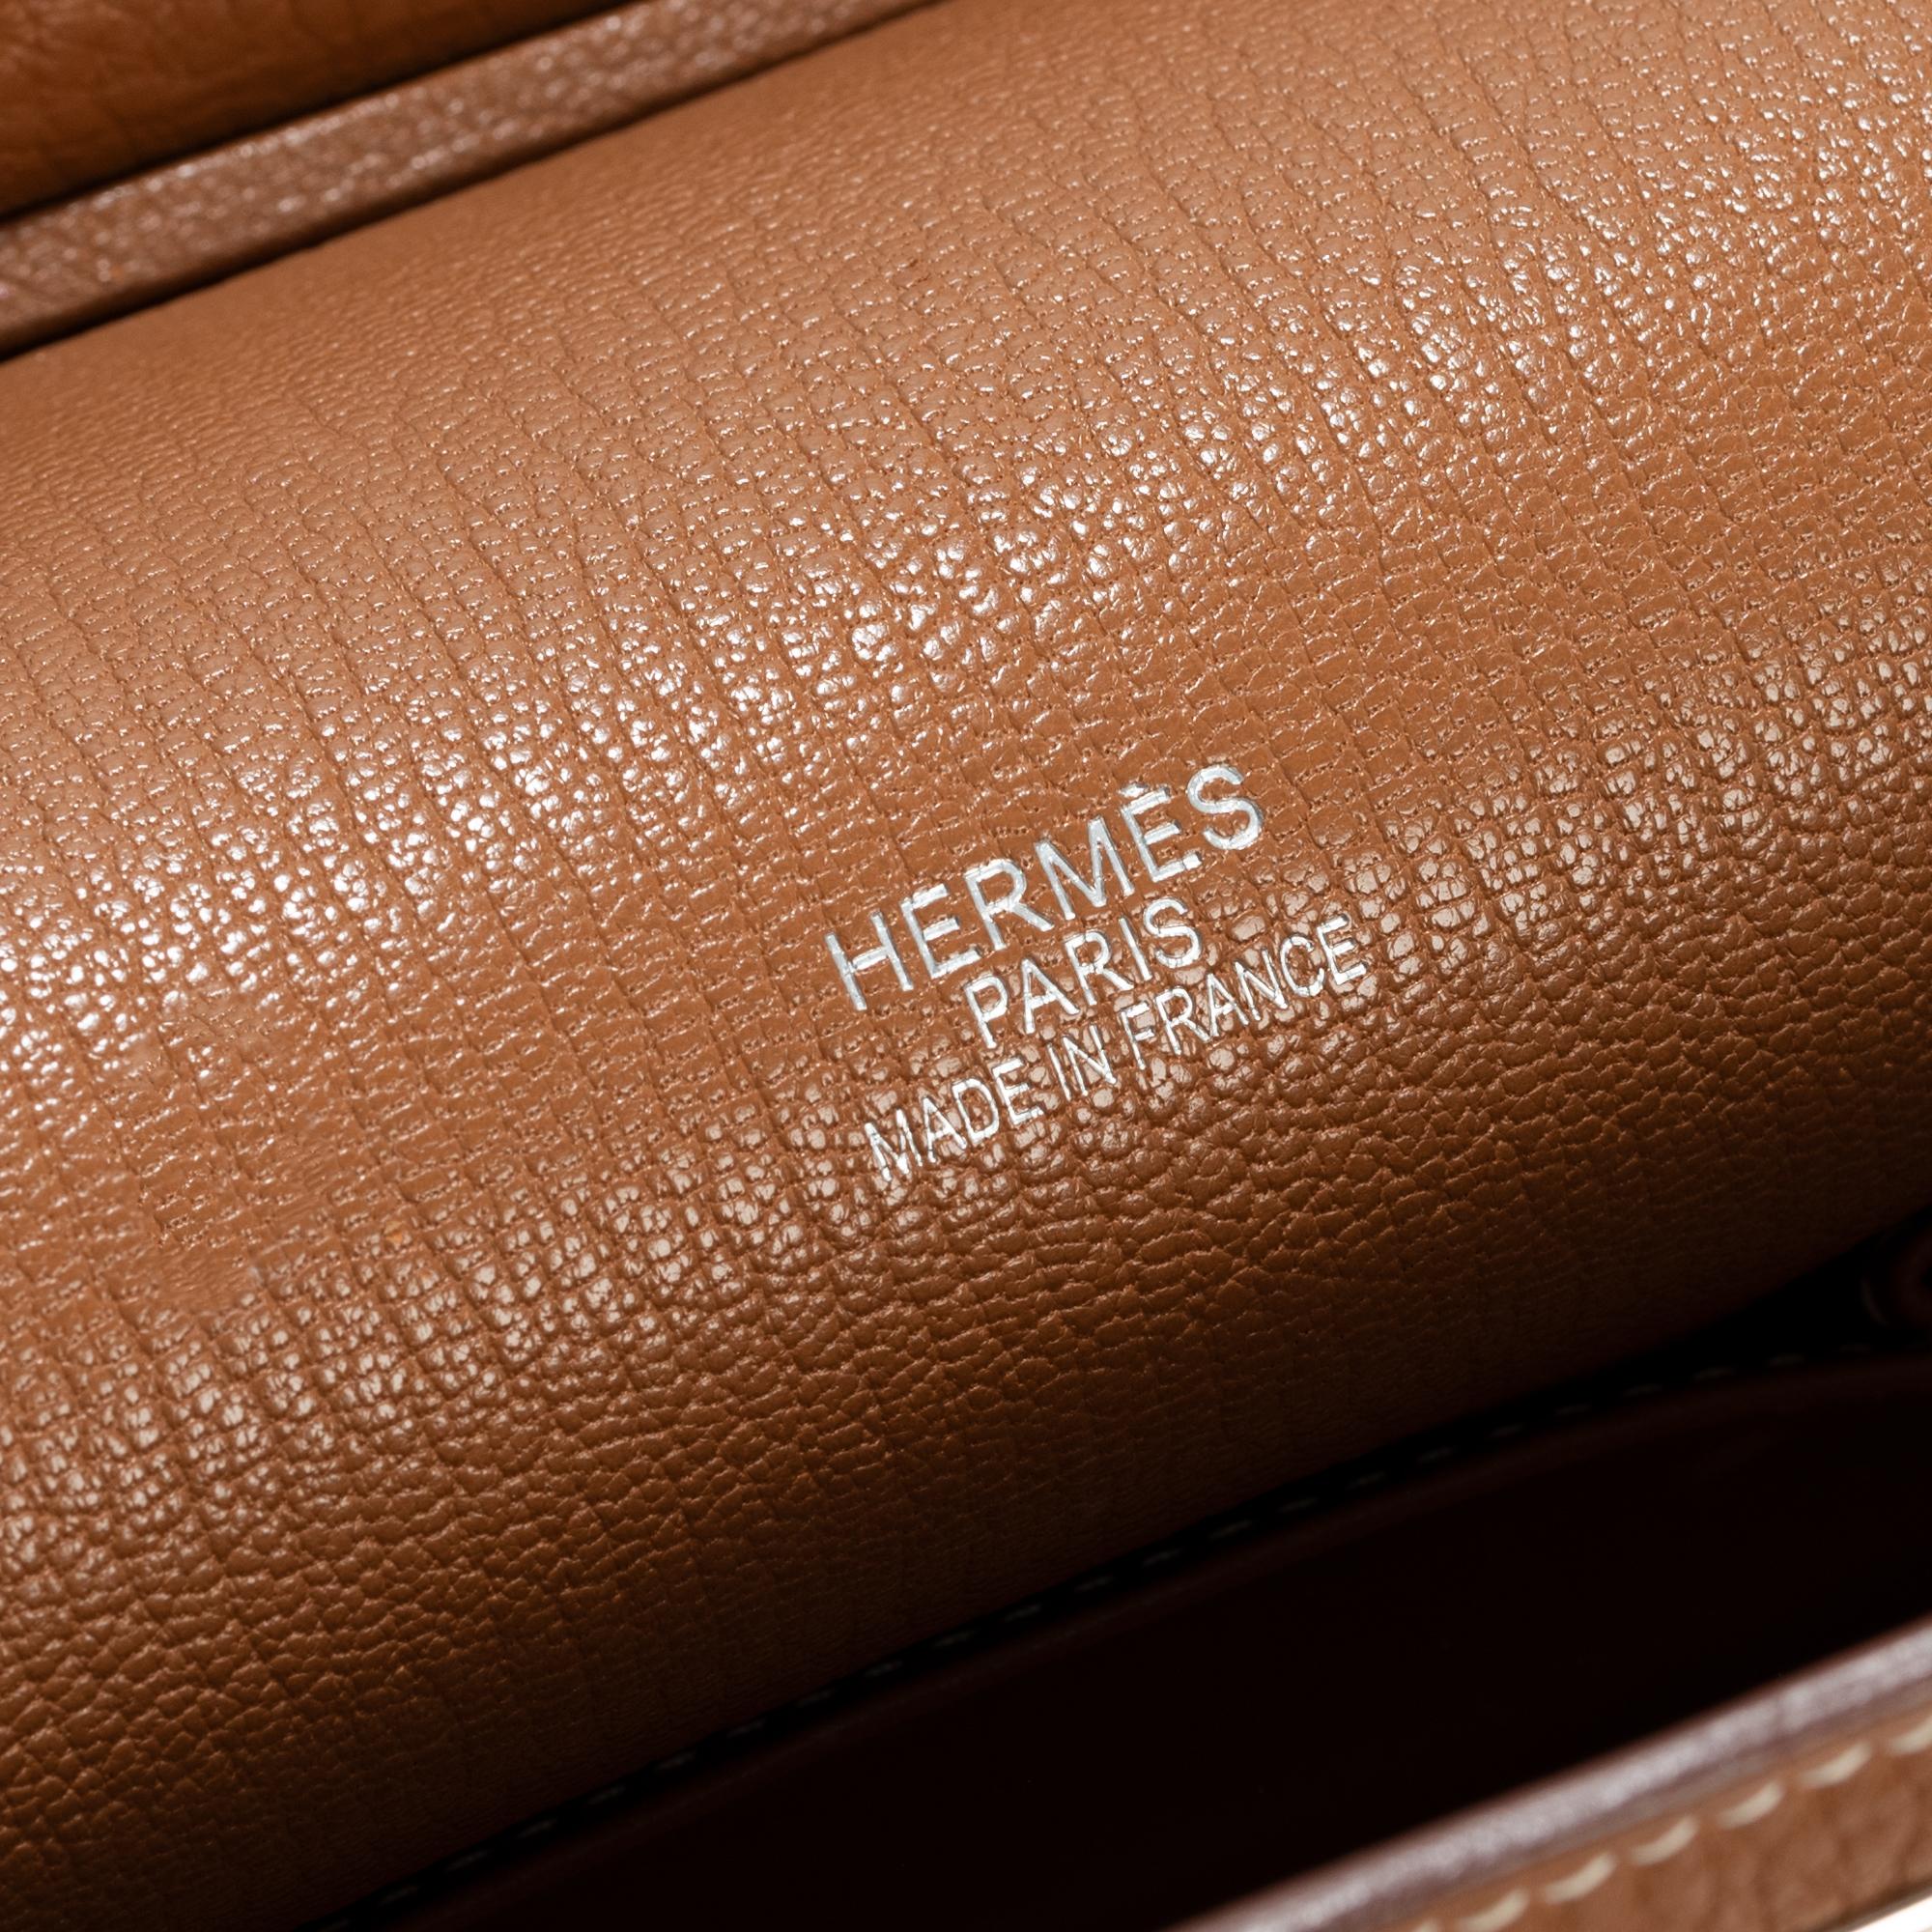 Hermès Jypsière crossbody bag in gold grained leather and PHW 7